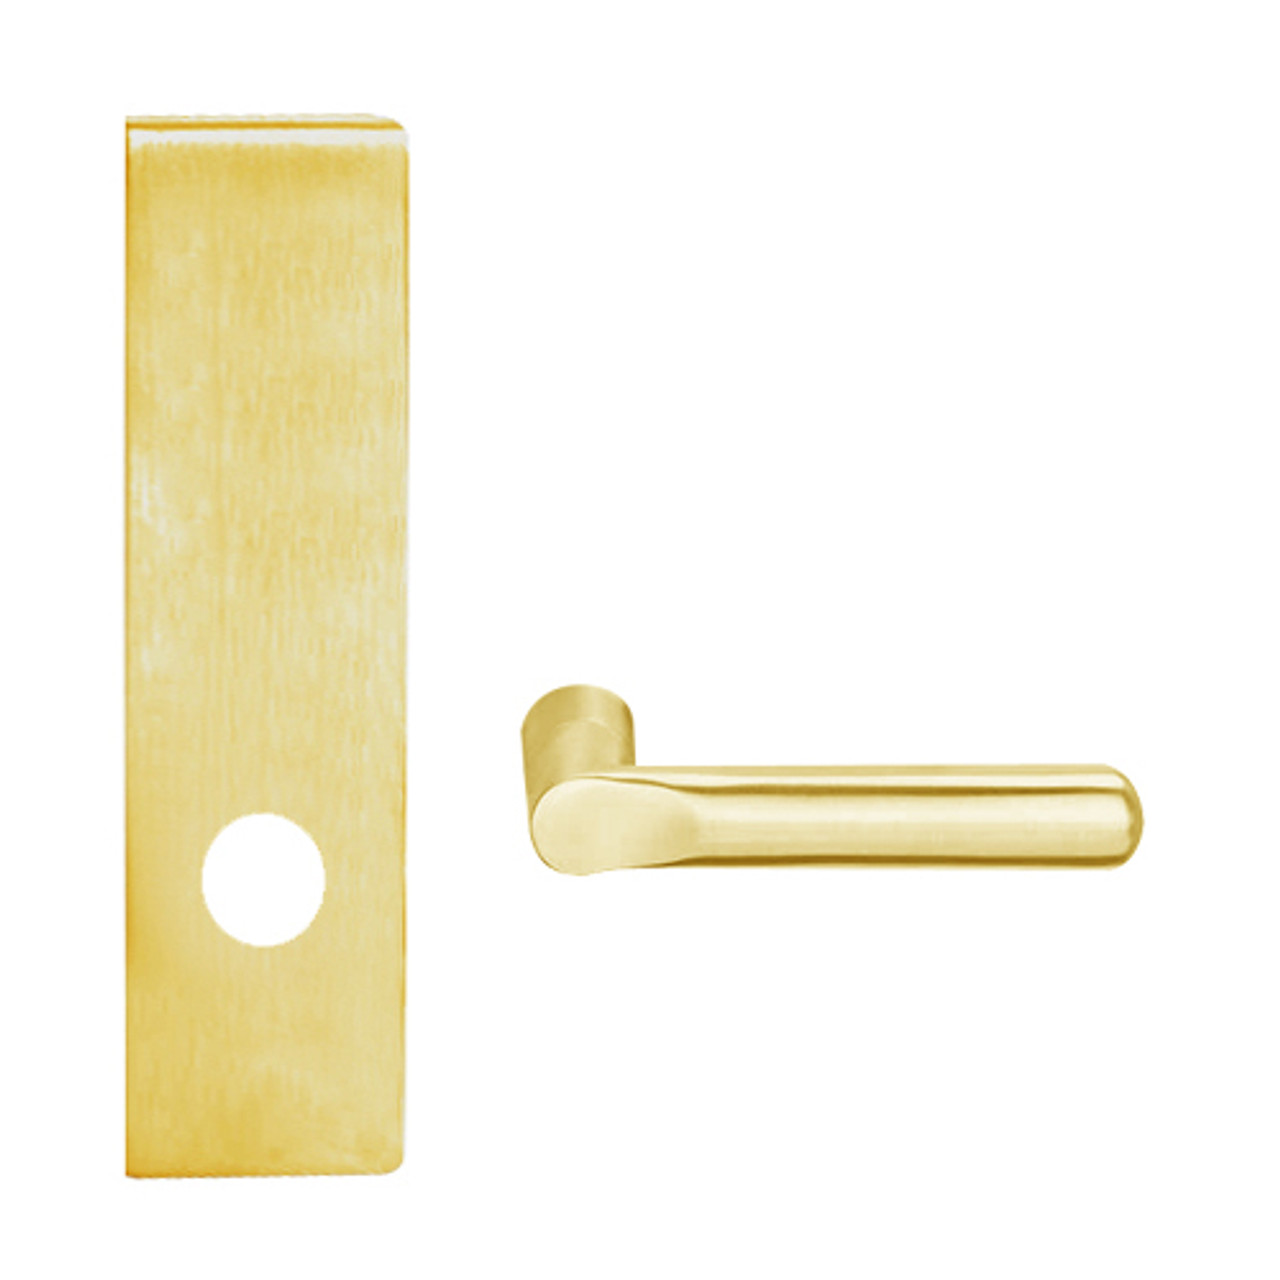 L0172-18N-605 Schlage L Series Double Dummy Trim Commercial Mortise Lock with 18 Cast Lever Design in Bright Brass